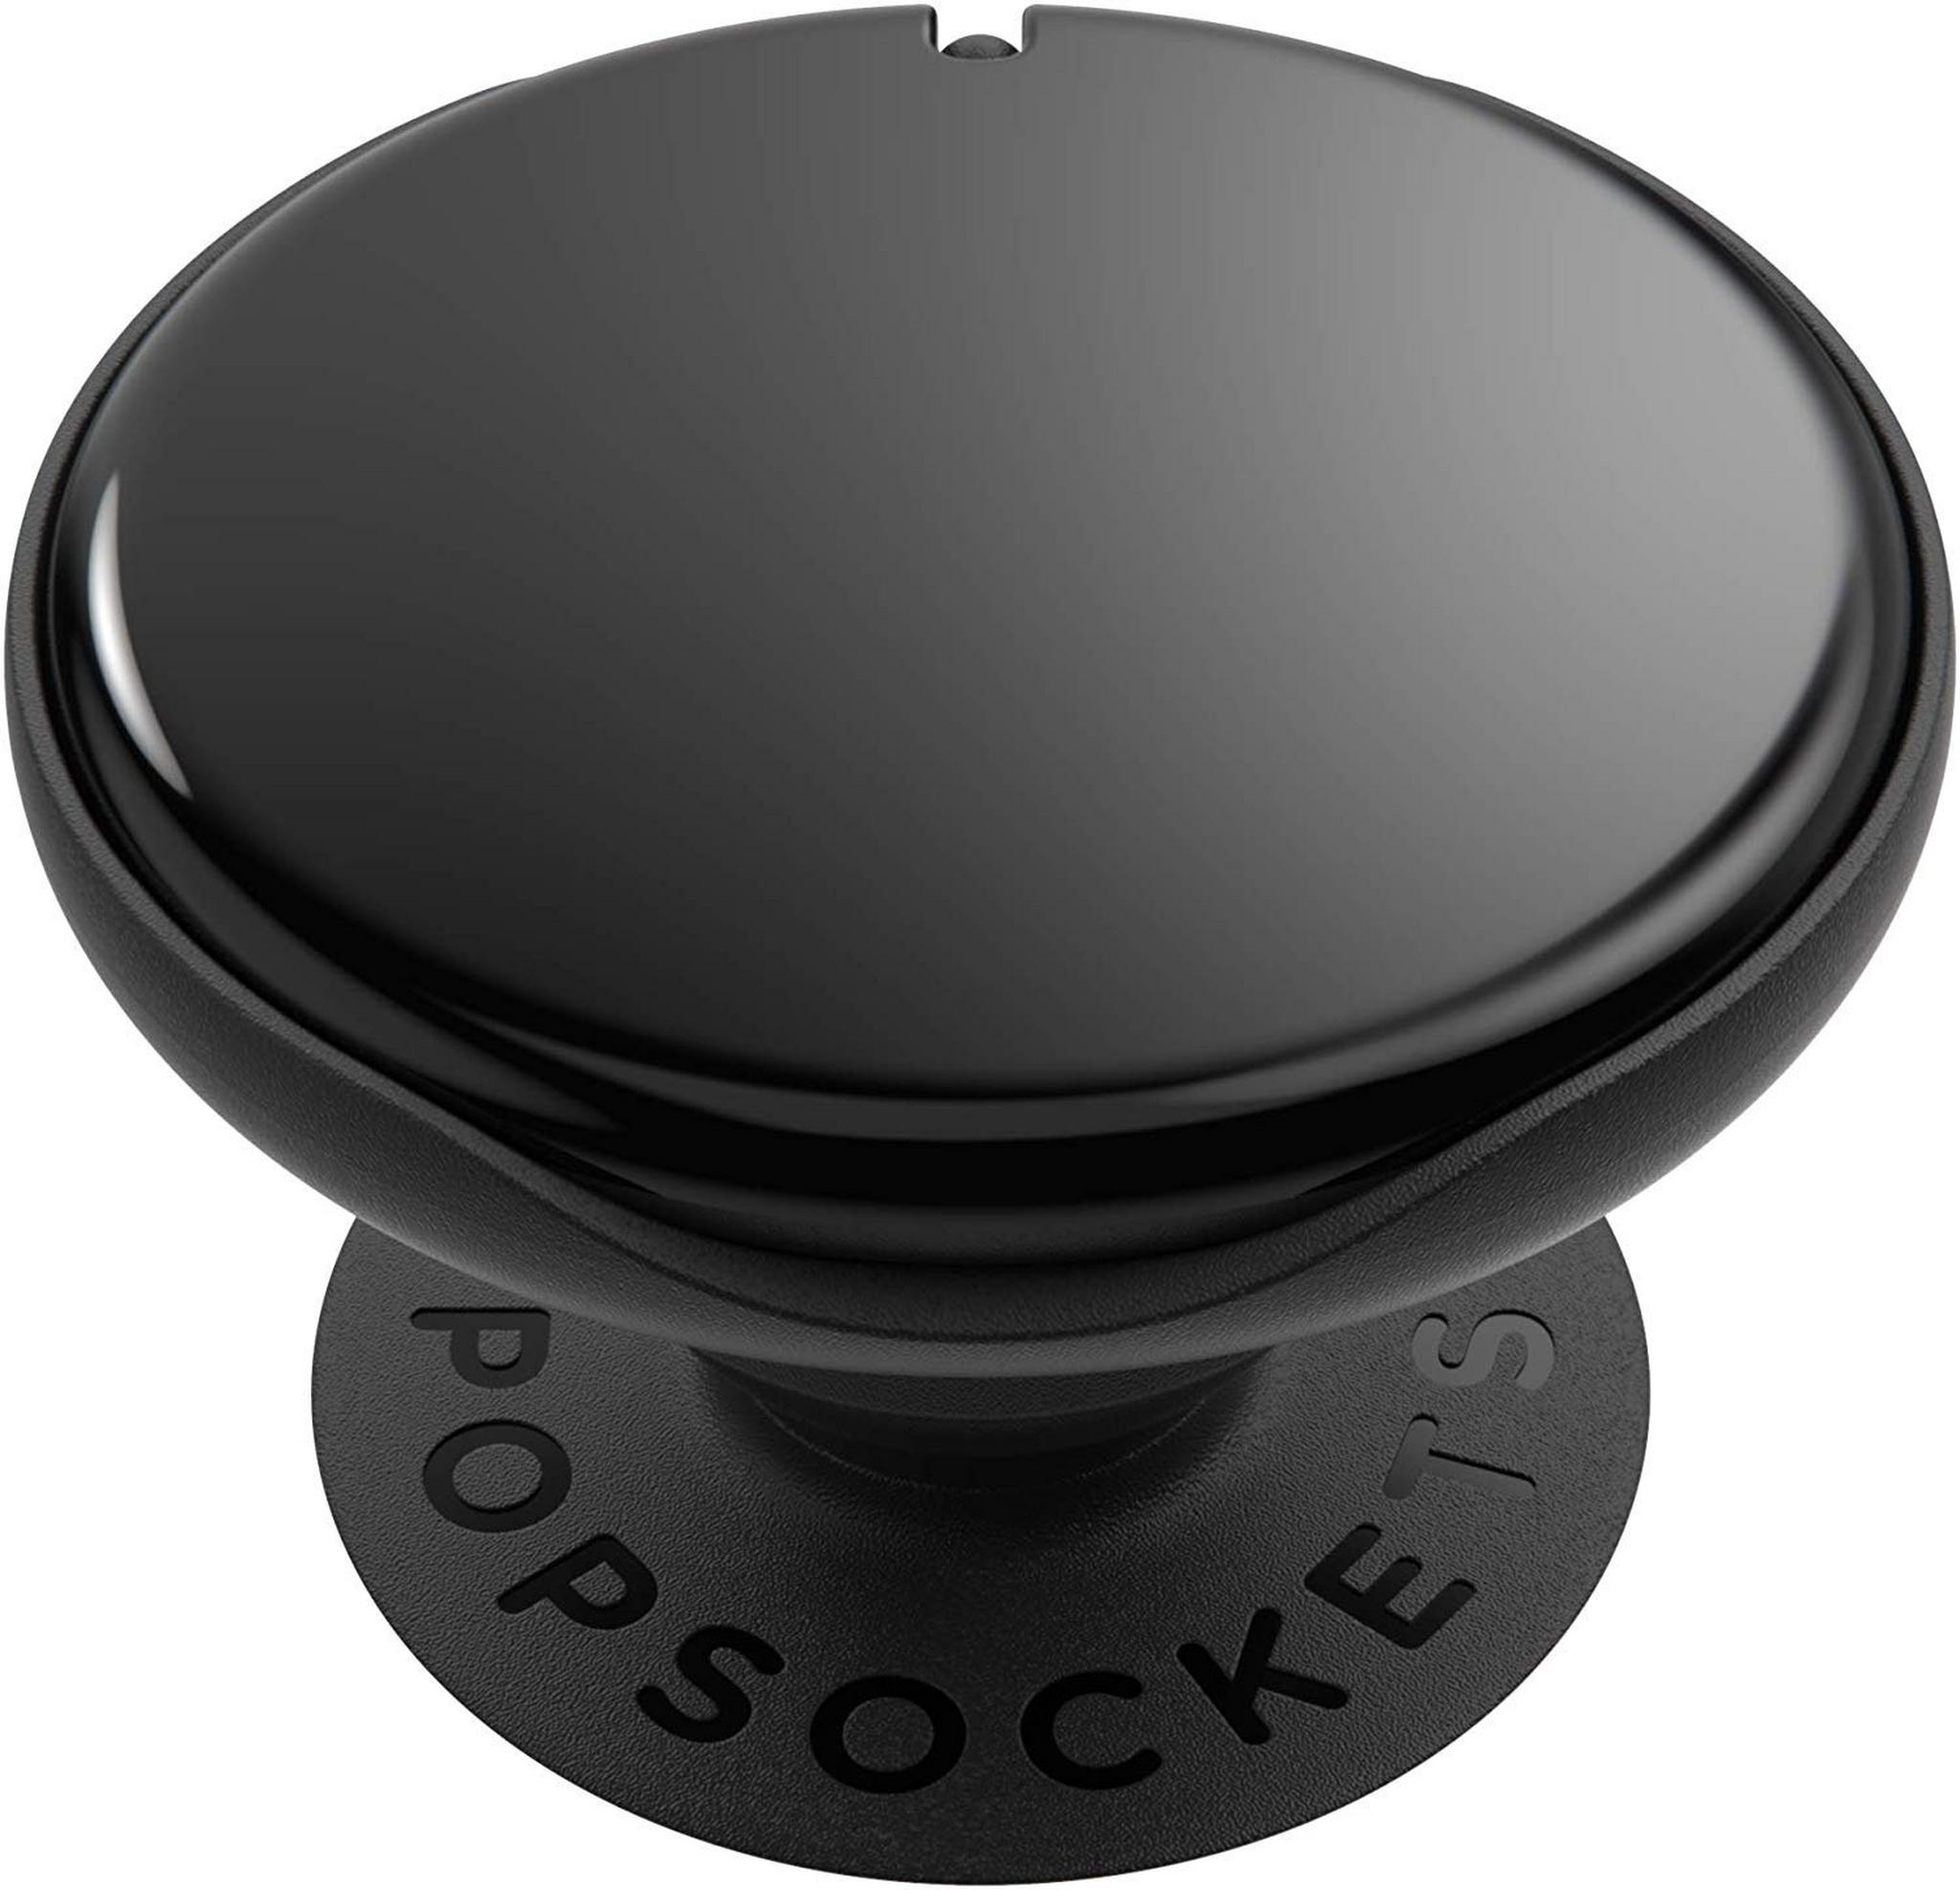 Popsockets Phone Stand and Grip (801915) -  Mirror Black